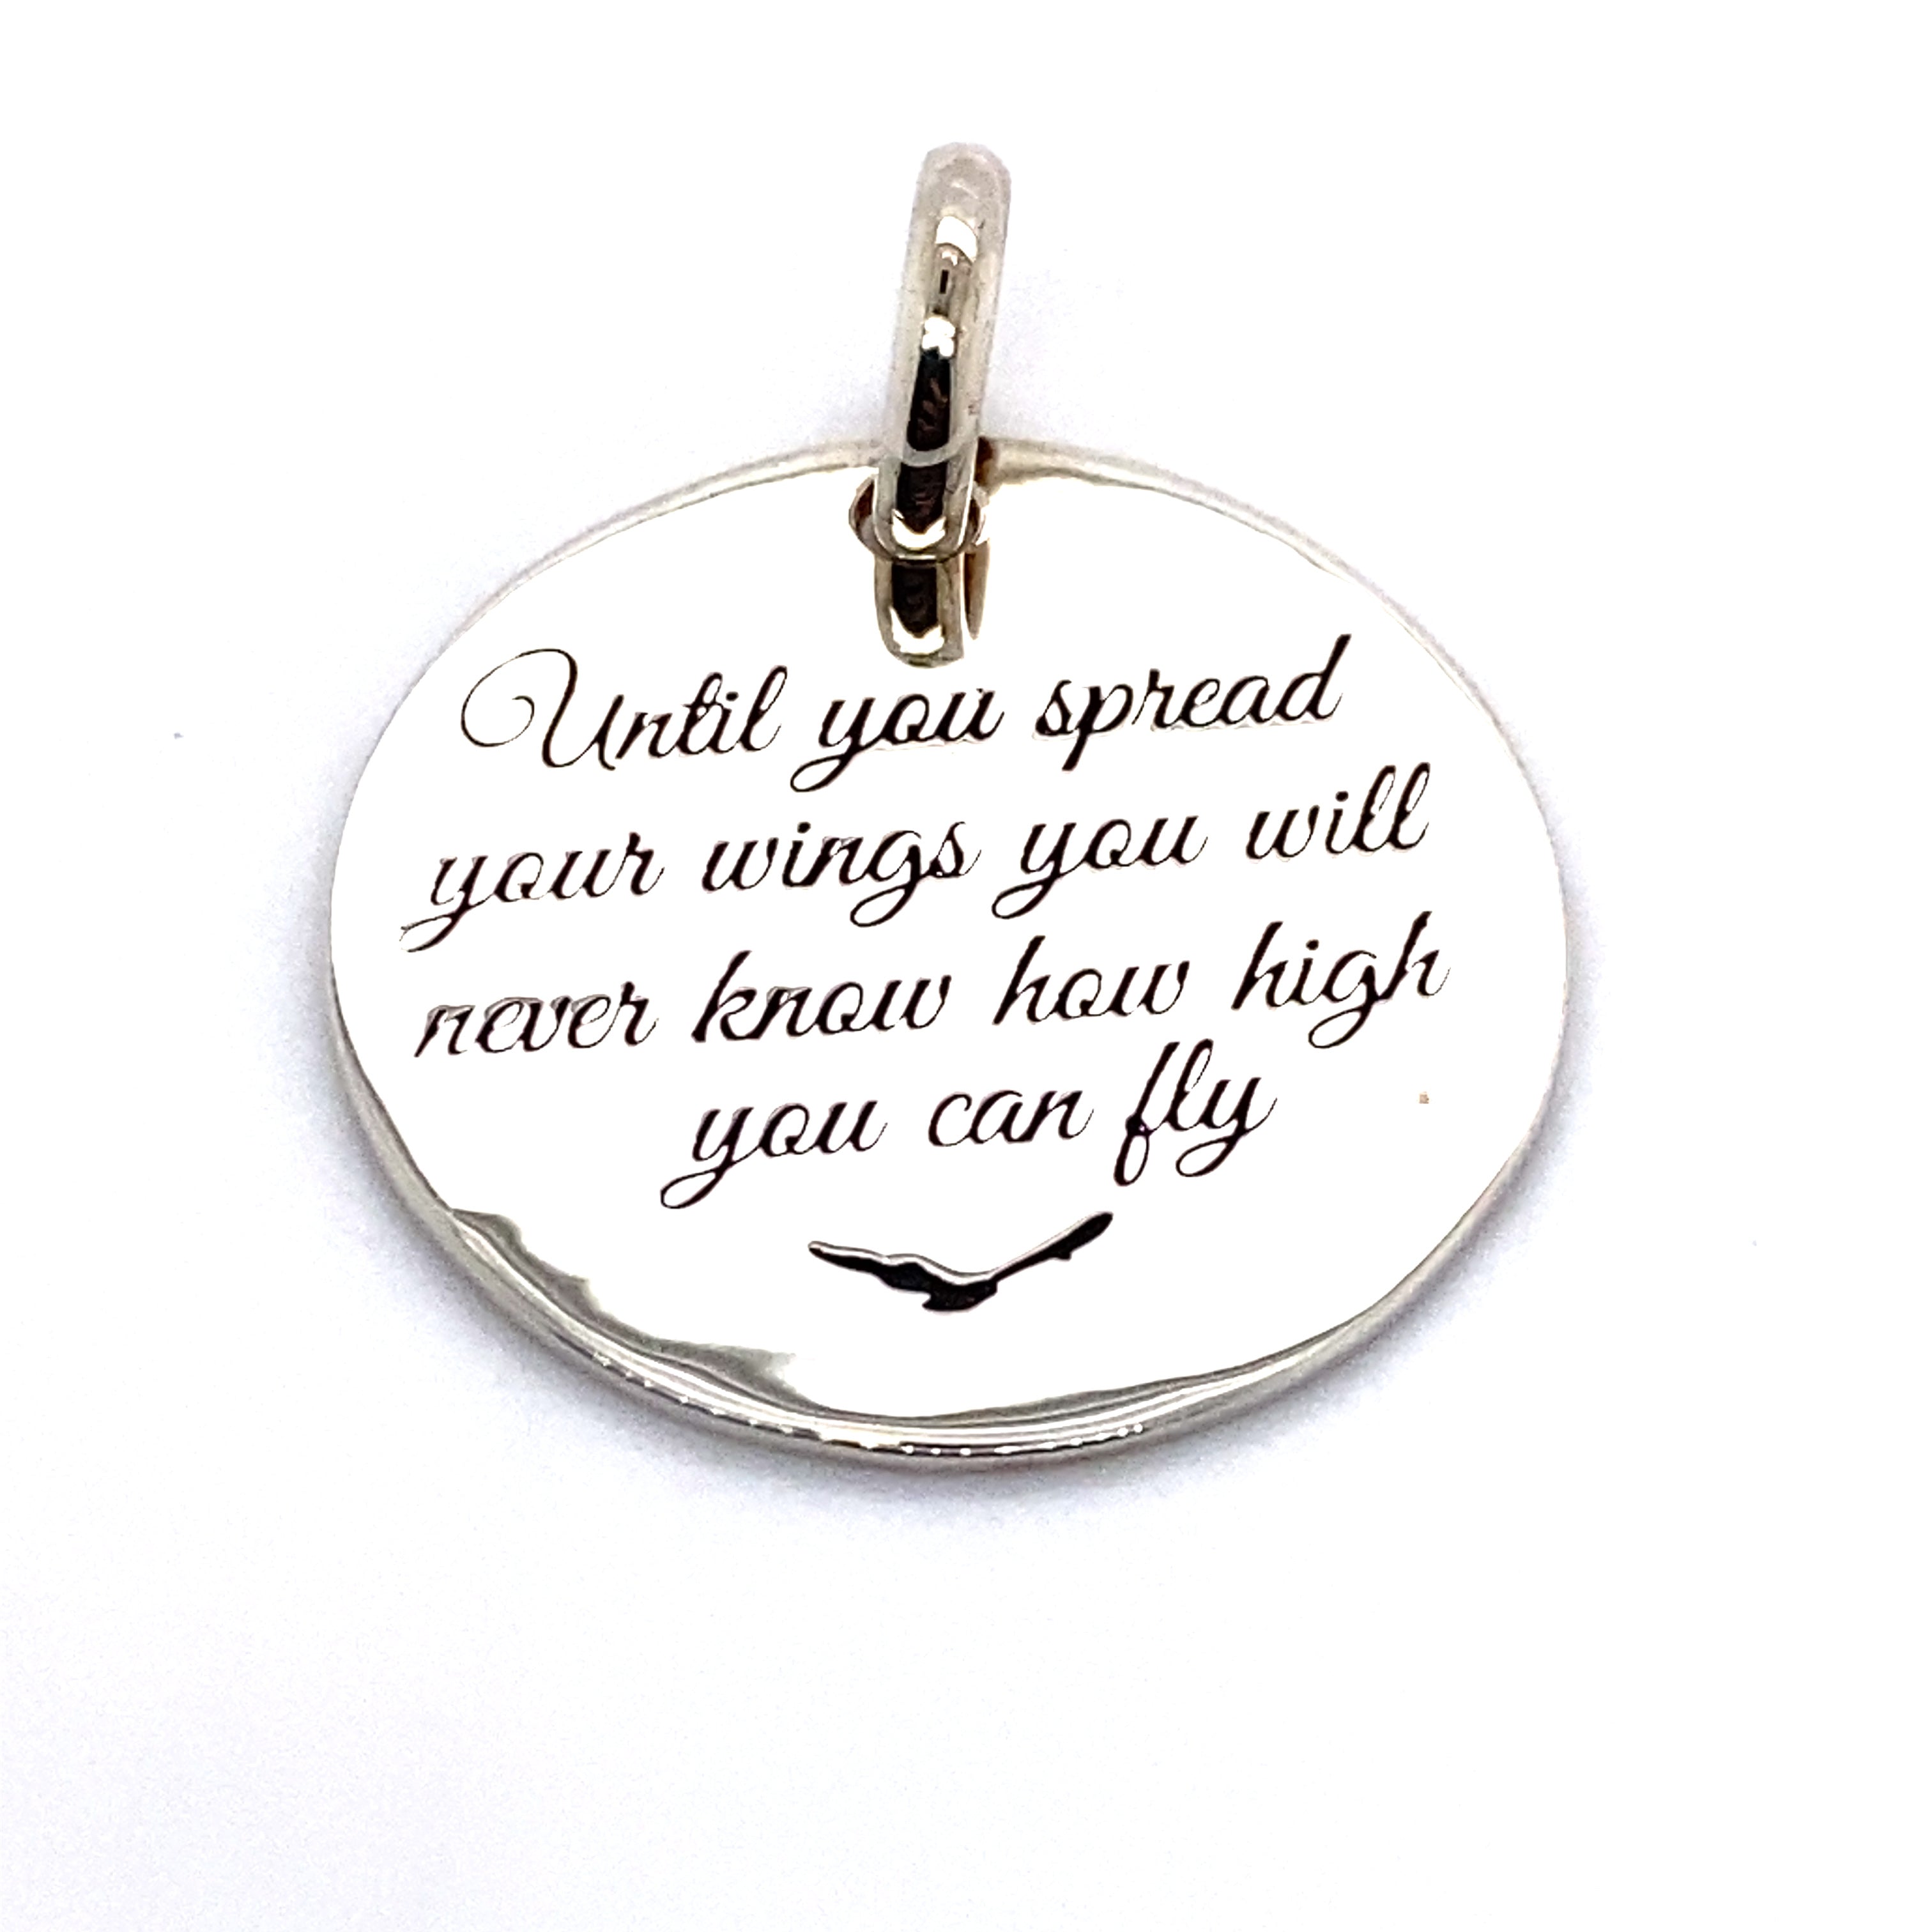 spread your wings pendant charm